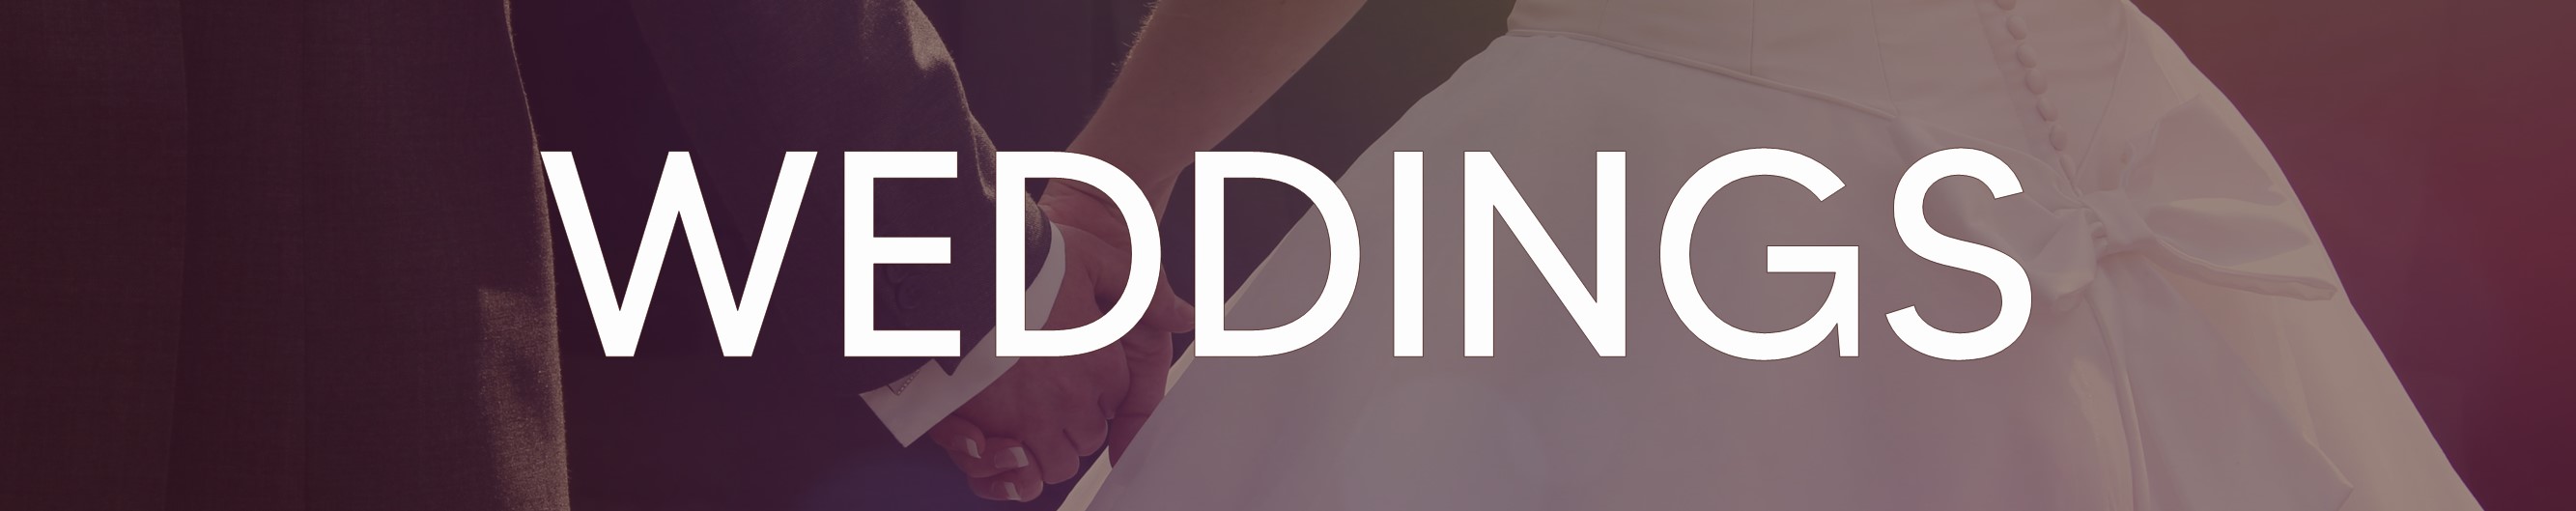 Weddings Page Banner